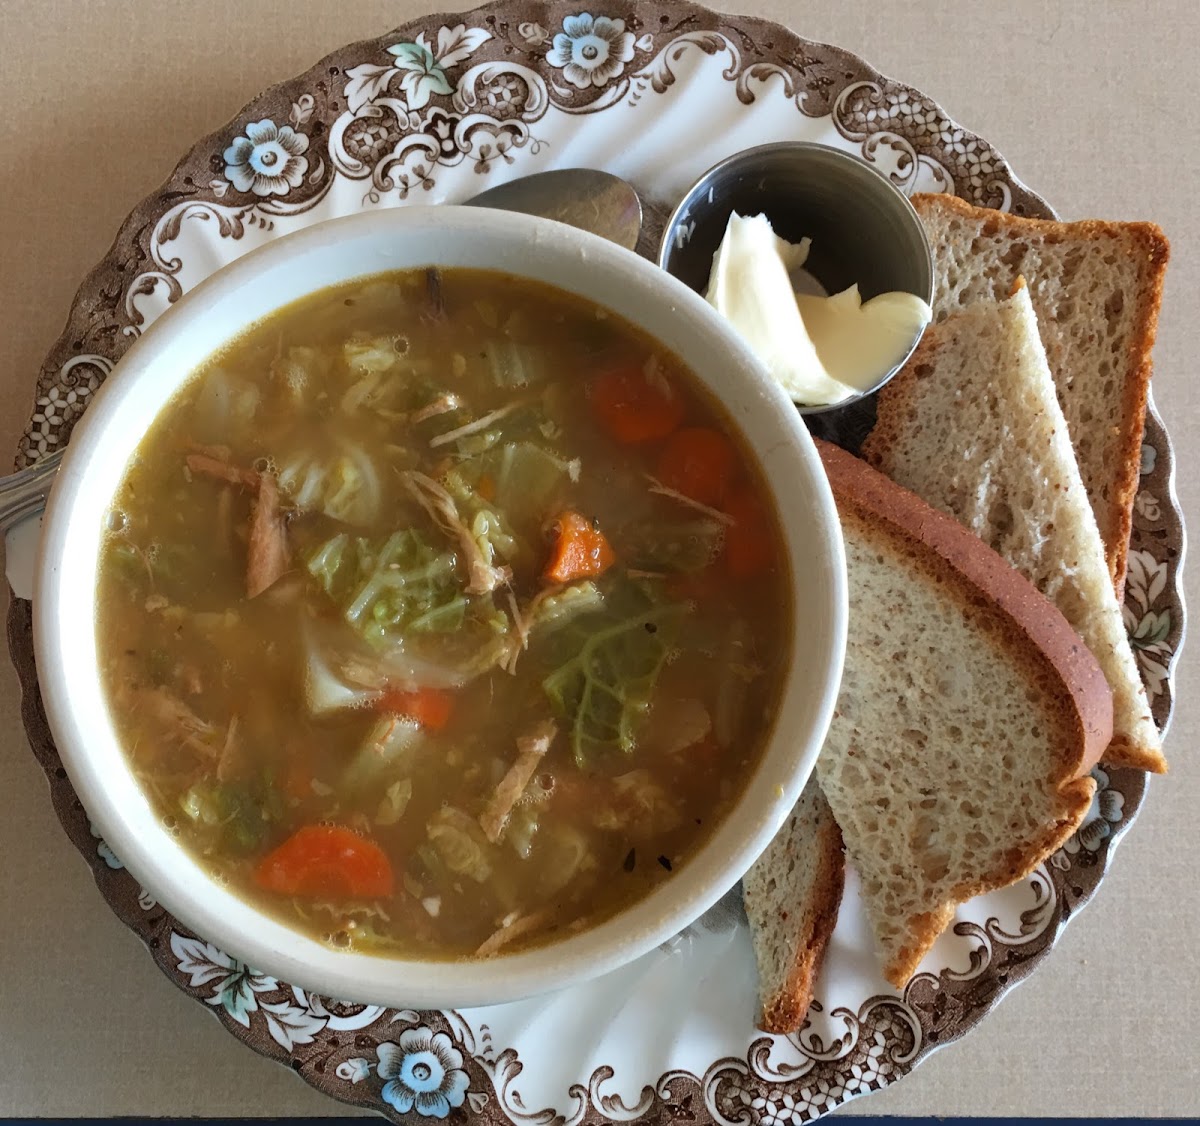 Bowl of Chicken, Cabbage and Jalapeño Soup with gluten free bread.